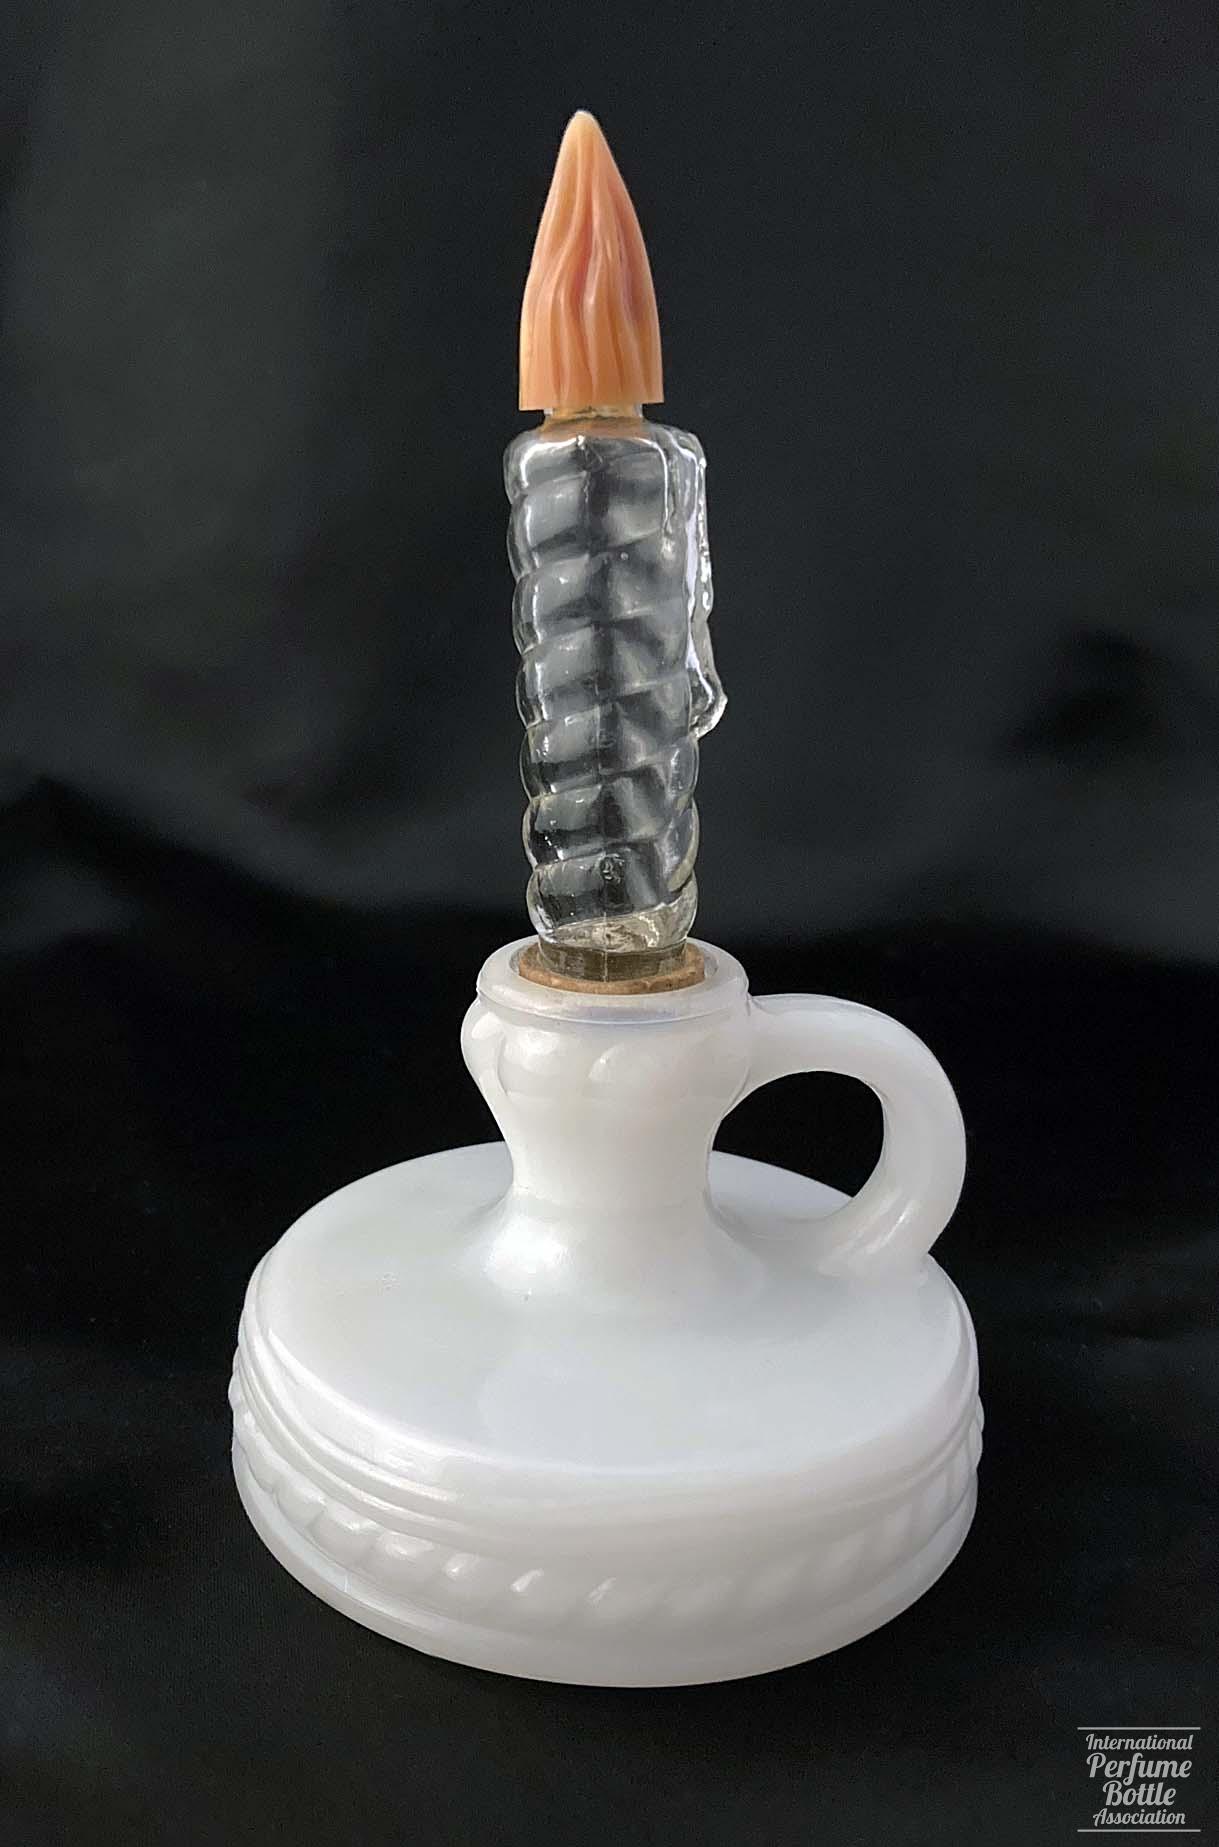 Candle Perfume in Milk Glass Holder by Lander